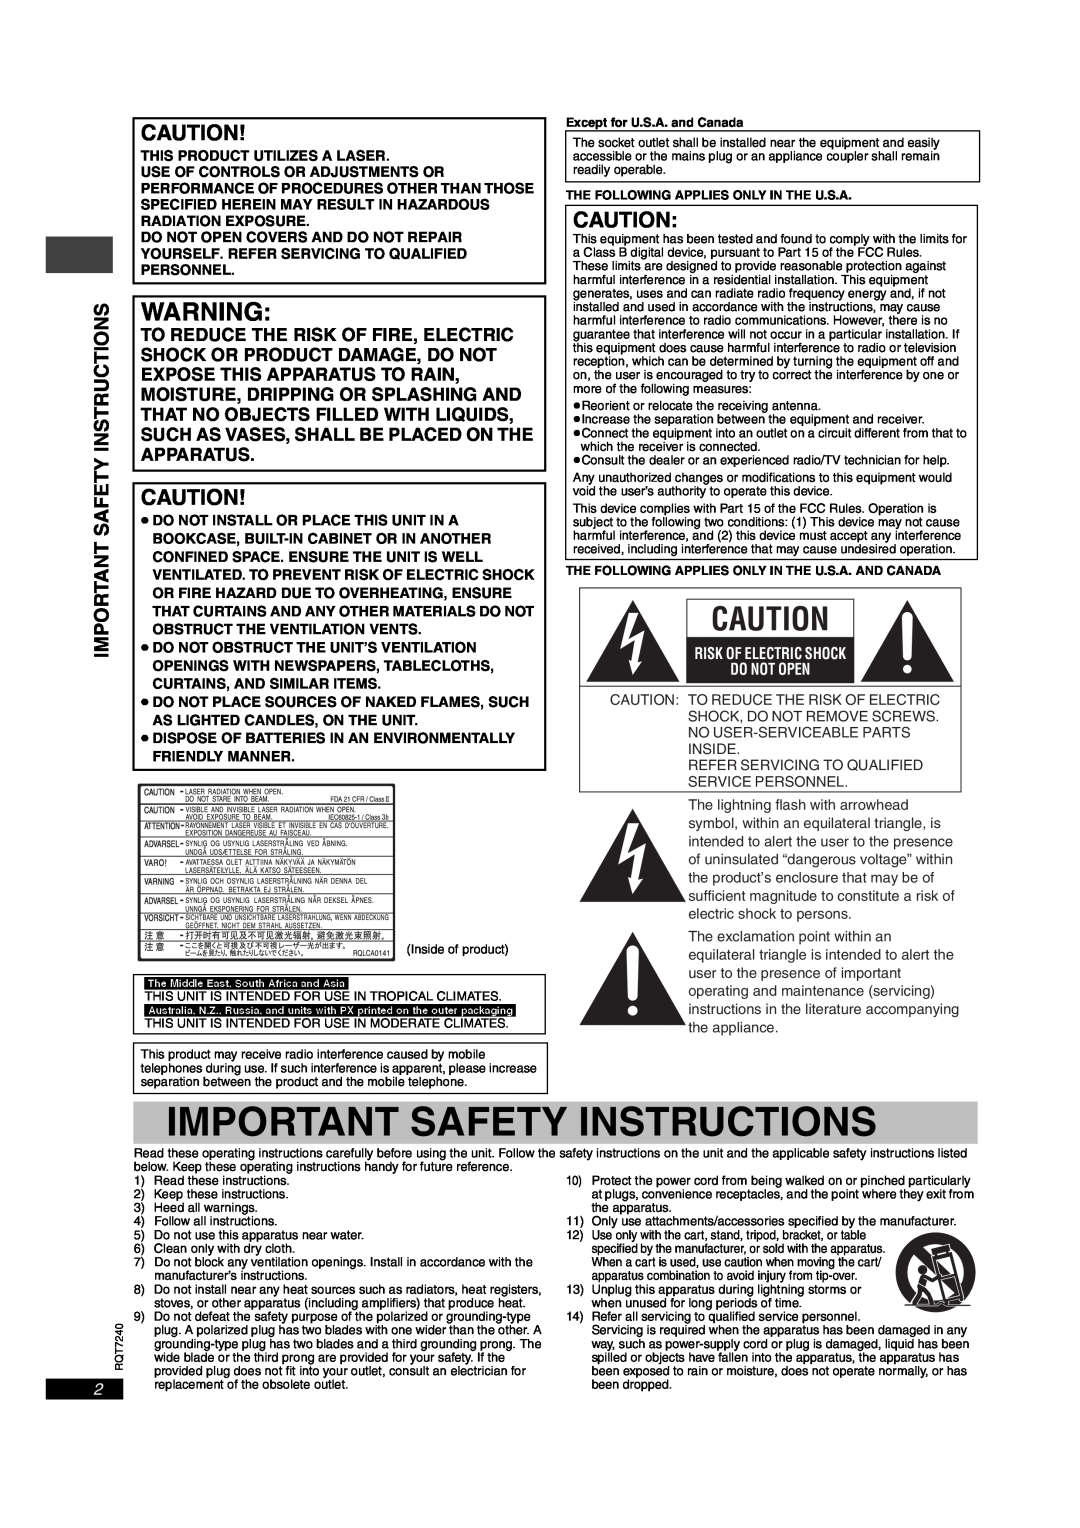 Panasonic DVD-S27U, DVD-S24 operating instructions Important Safety Instructions, Risk Of Electric Shock Do Not Open 